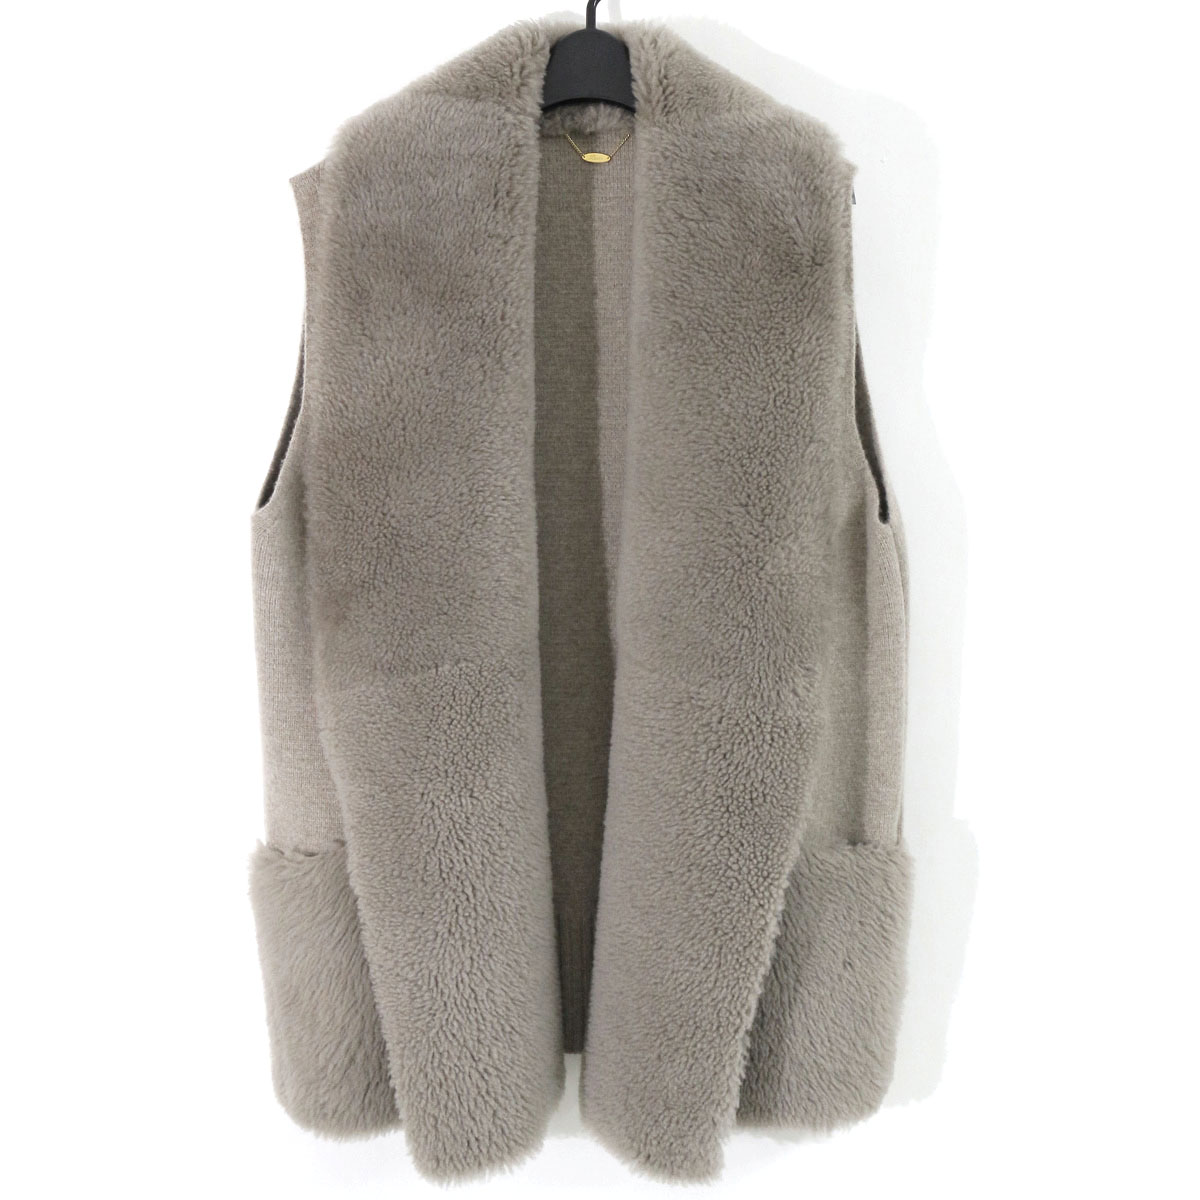 L'Appartement Lisiere アパルトモン リジエール 21AW Mouton×Knit VEST ムートンレザーコンビネーションニットベスト 21010560101130